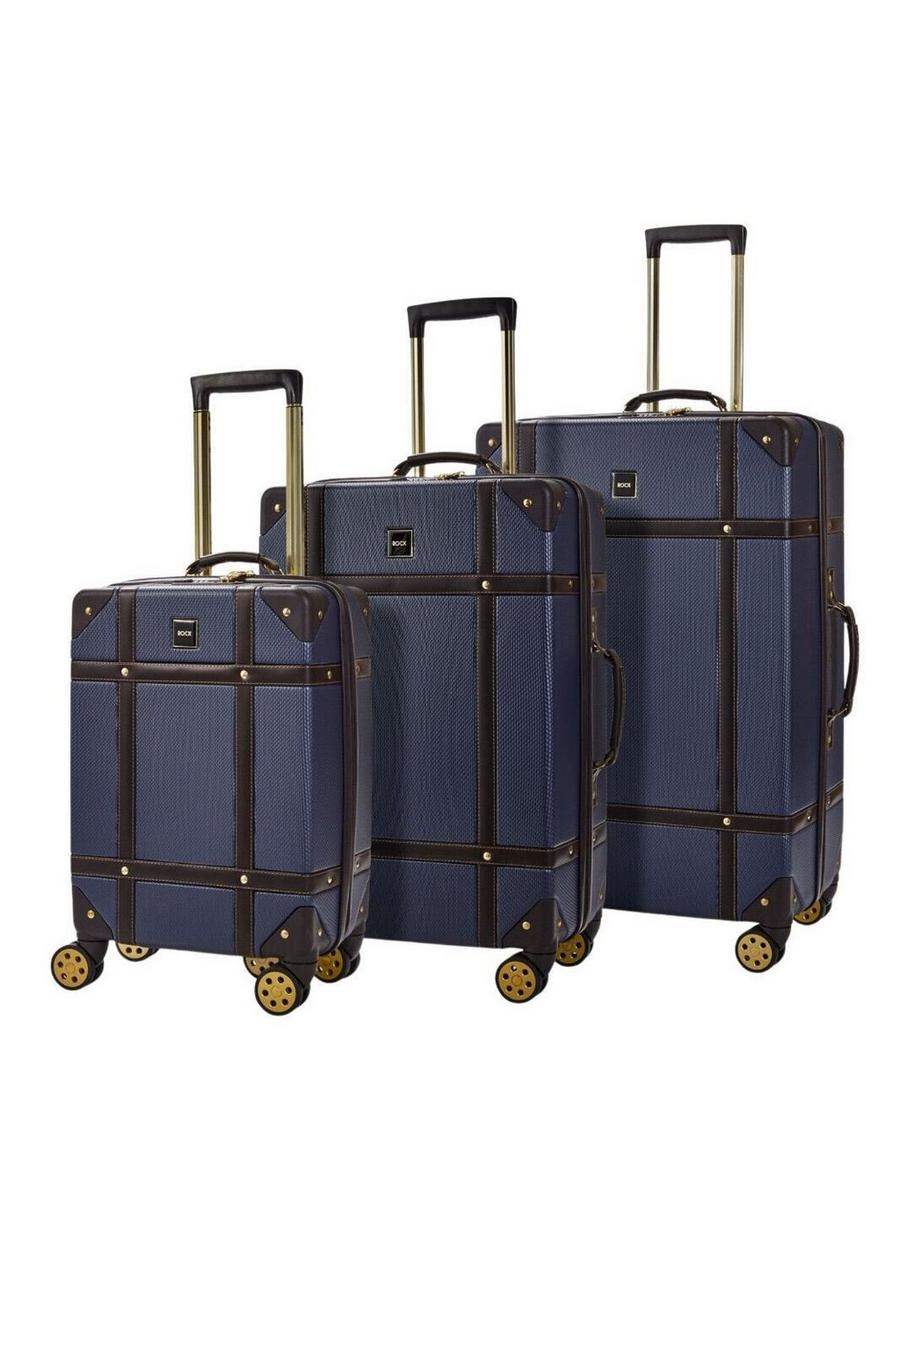 Navy Vintage Hard Shell Luggage Suitcase Trunk Cabin Travel Bags Set Of 3